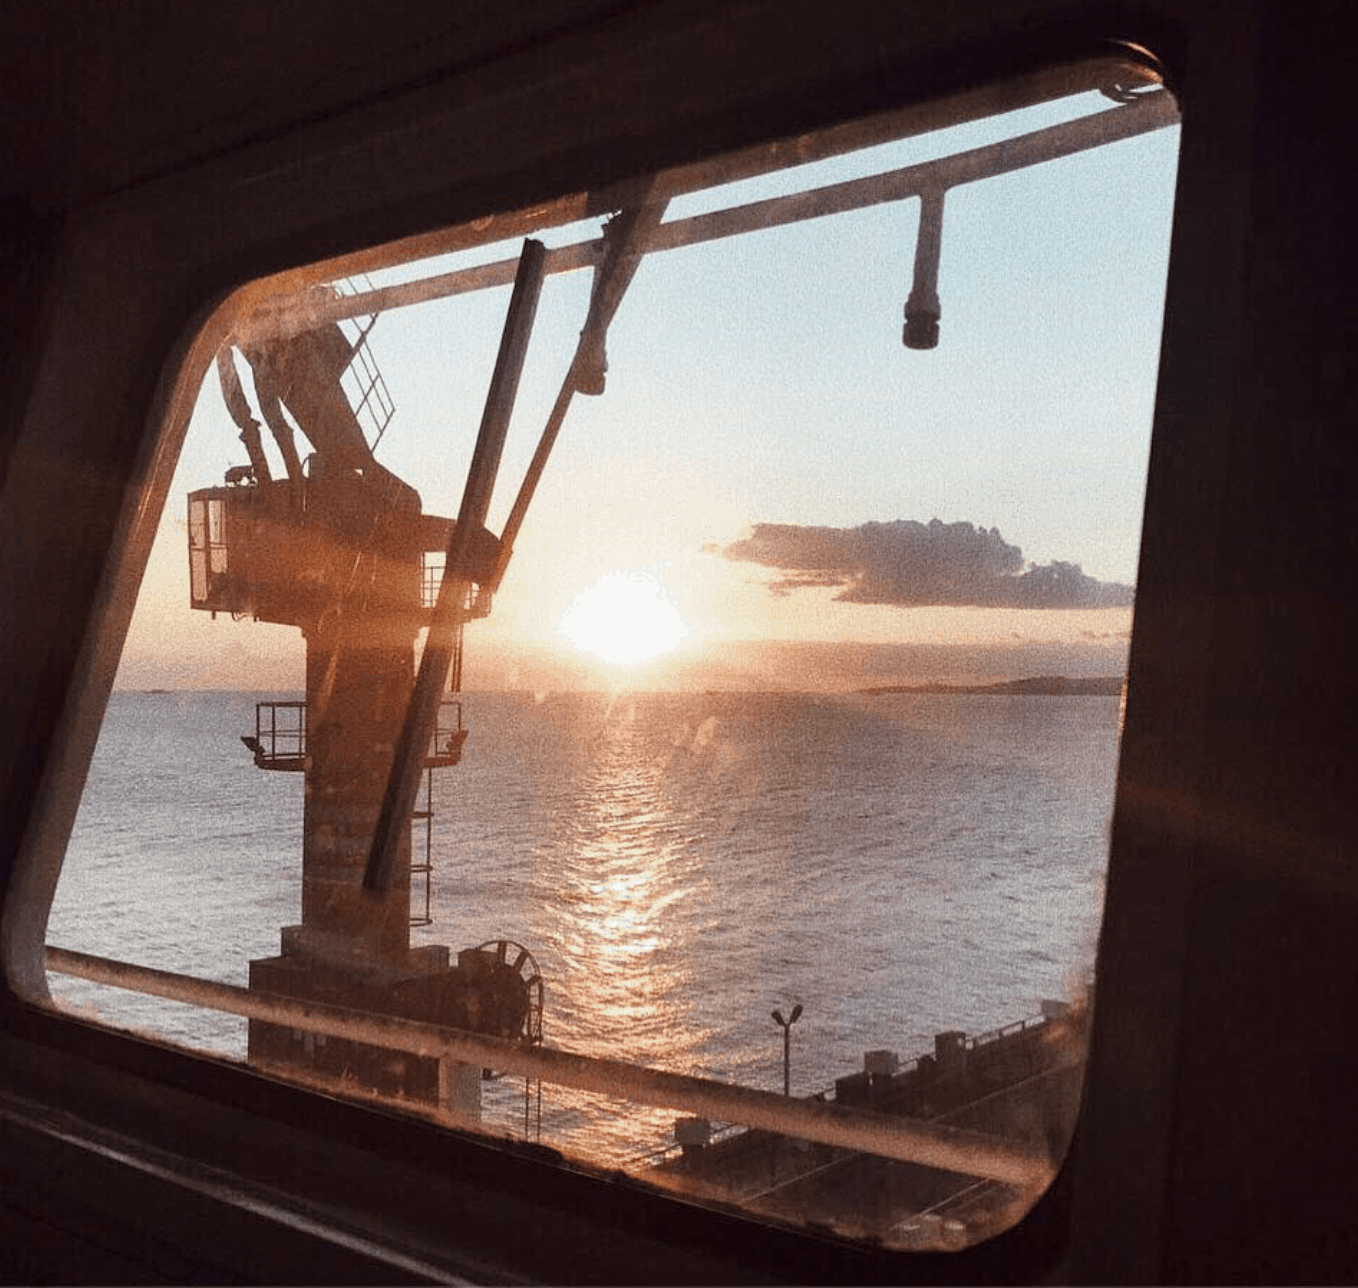 4. Window to the sea. Credits to Queensway Navigation